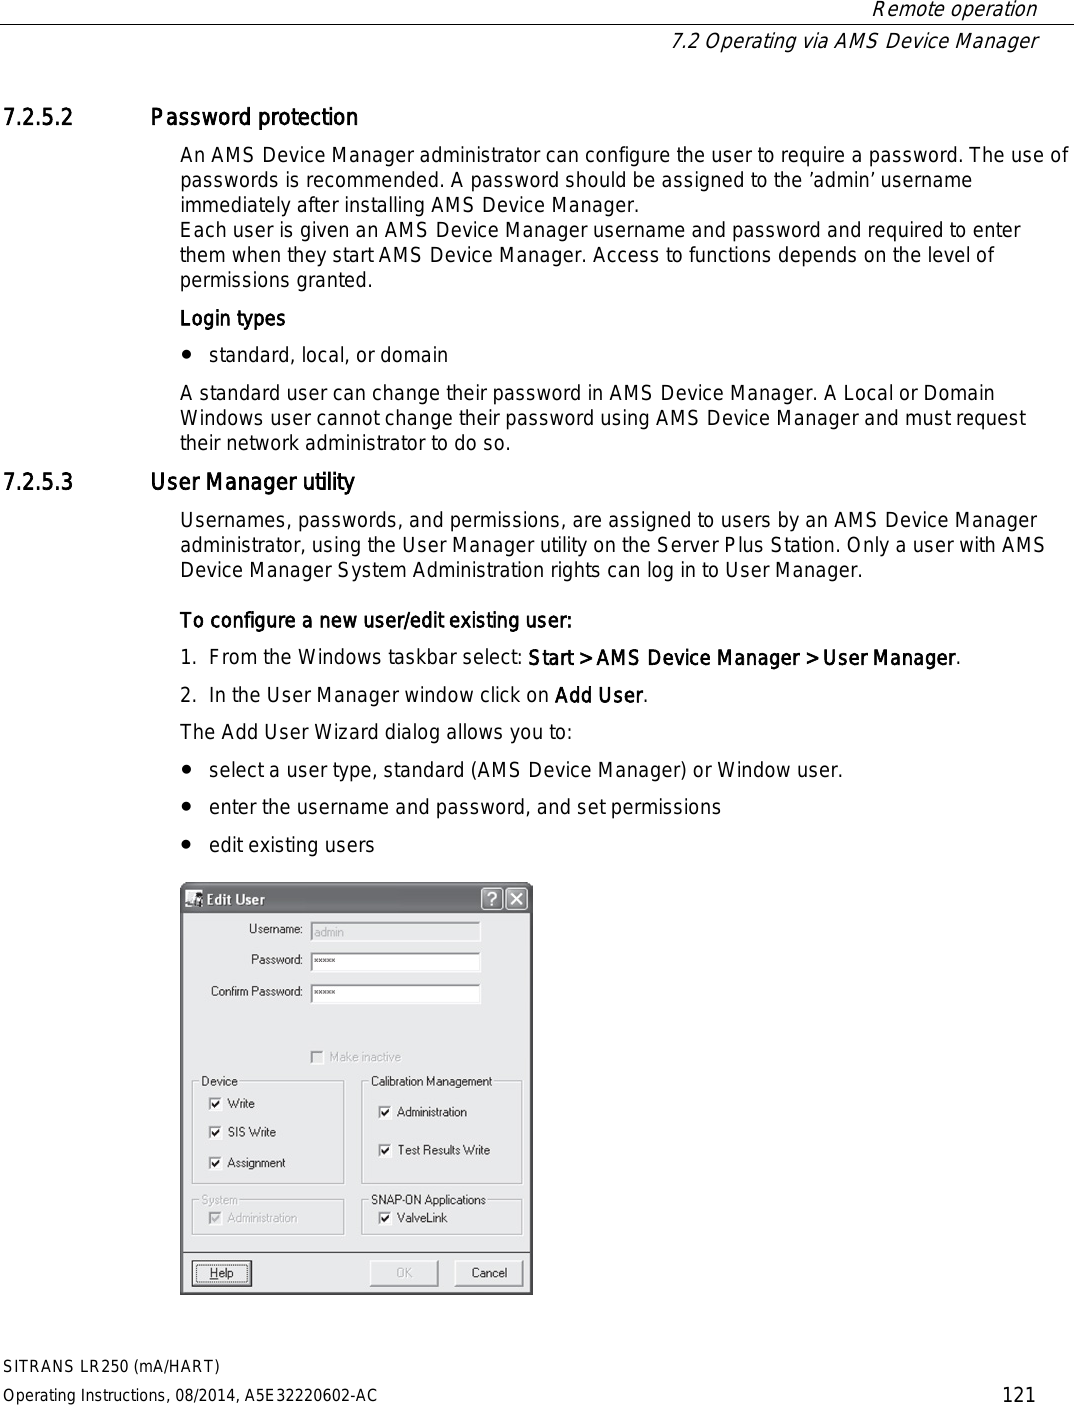  Remote operation  7.2 Operating via AMS Device Manager SITRANS LR250 (mA/HART) Operating Instructions, 08/2014, A5E32220602-AC 121 7.2.5.2 Password protection An AMS Device Manager administrator can configure the user to require a password. The use of passwords is recommended. A password should be assigned to the ’admin’ username immediately after installing AMS Device Manager. Each user is given an AMS Device Manager username and password and required to enter them when they start AMS Device Manager. Access to functions depends on the level of permissions granted. Login types ● standard, local, or domain A standard user can change their password in AMS Device Manager. A Local or Domain Windows user cannot change their password using AMS Device Manager and must request their network administrator to do so. 7.2.5.3 User Manager utility Usernames, passwords, and permissions, are assigned to users by an AMS Device Manager administrator, using the User Manager utility on the Server Plus Station. Only a user with AMS Device Manager System Administration rights can log in to User Manager. To configure a new user/edit existing user:  1. From the Windows taskbar select: Start &gt; AMS Device Manager &gt; User Manager. 2. In the User Manager window click on Add User. The Add User Wizard dialog allows you to: ● select a user type, standard (AMS Device Manager) or Window user. ● enter the username and password, and set permissions ● edit existing users  